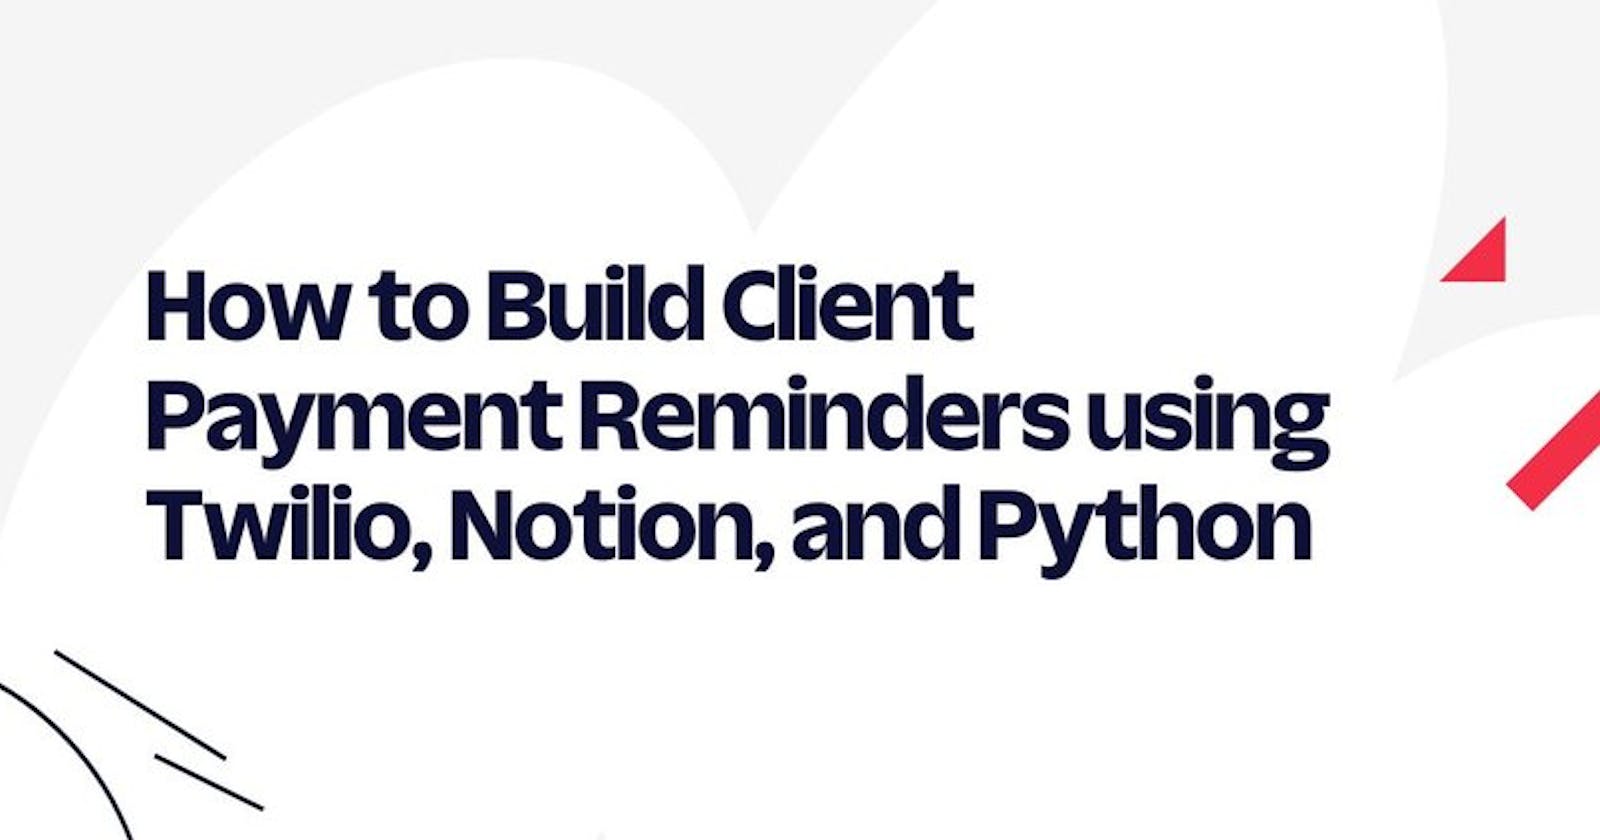 Build Client Payment Reminders using Twilio, Notion, and Python